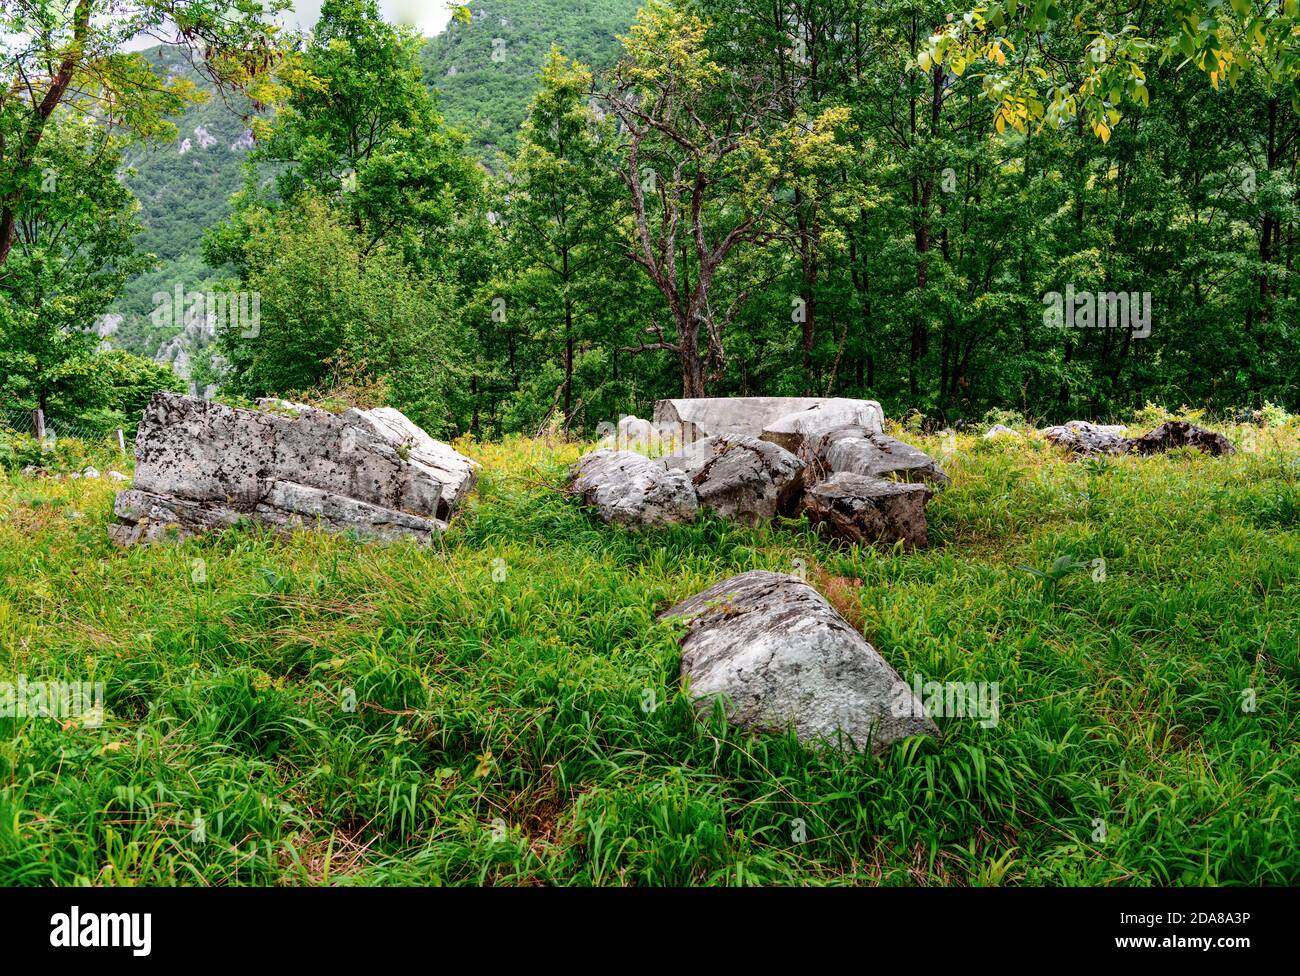 Medieval tombstones from 13Th century called Mramorje or Urosevine, located on Tara mountain near Krizevac village.Necropolis of different shapes. Stock Photo